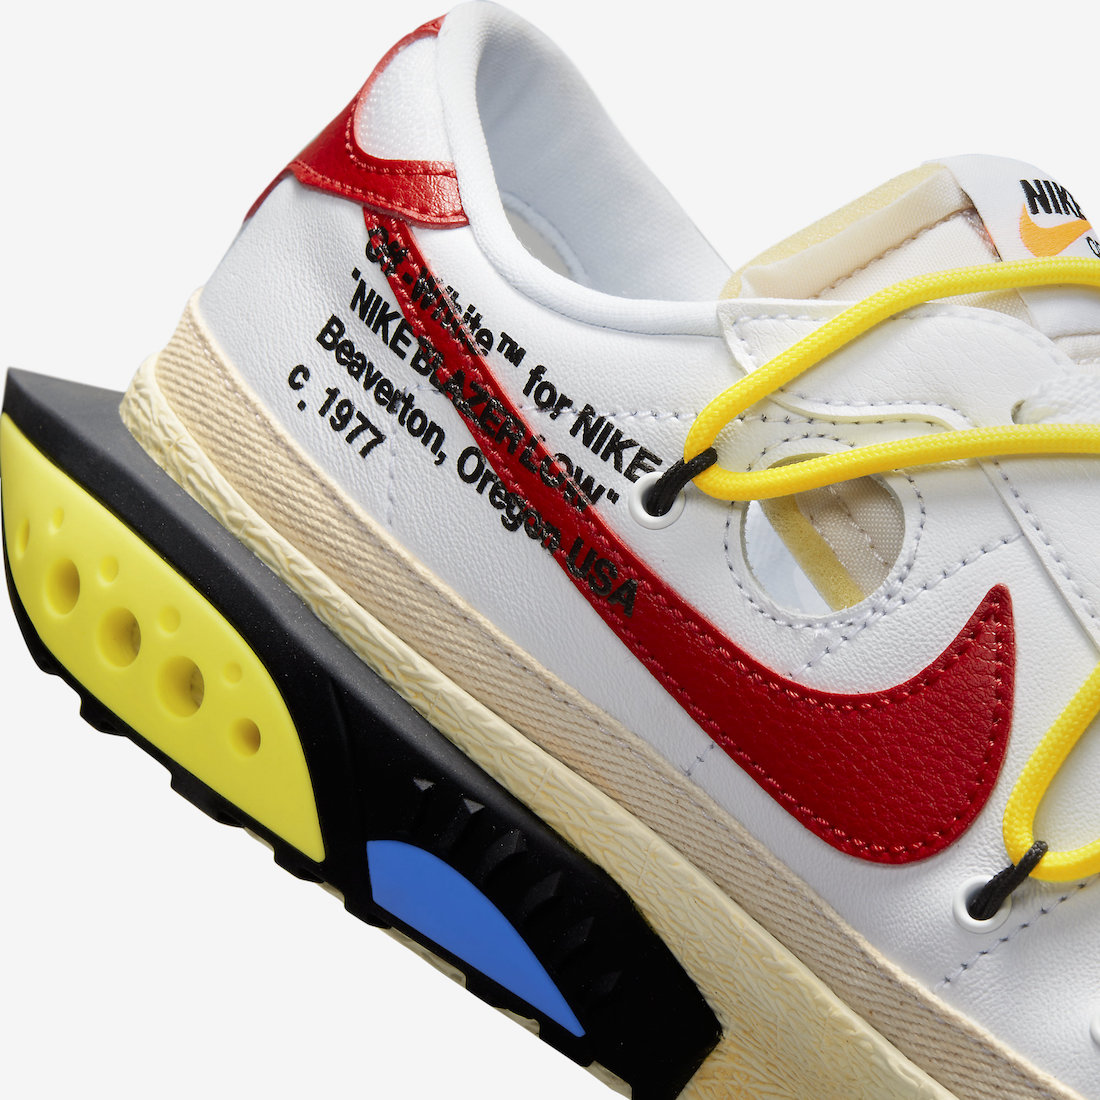 Off-White Nike Blazer Low White University Red DH7863-100 Release Date